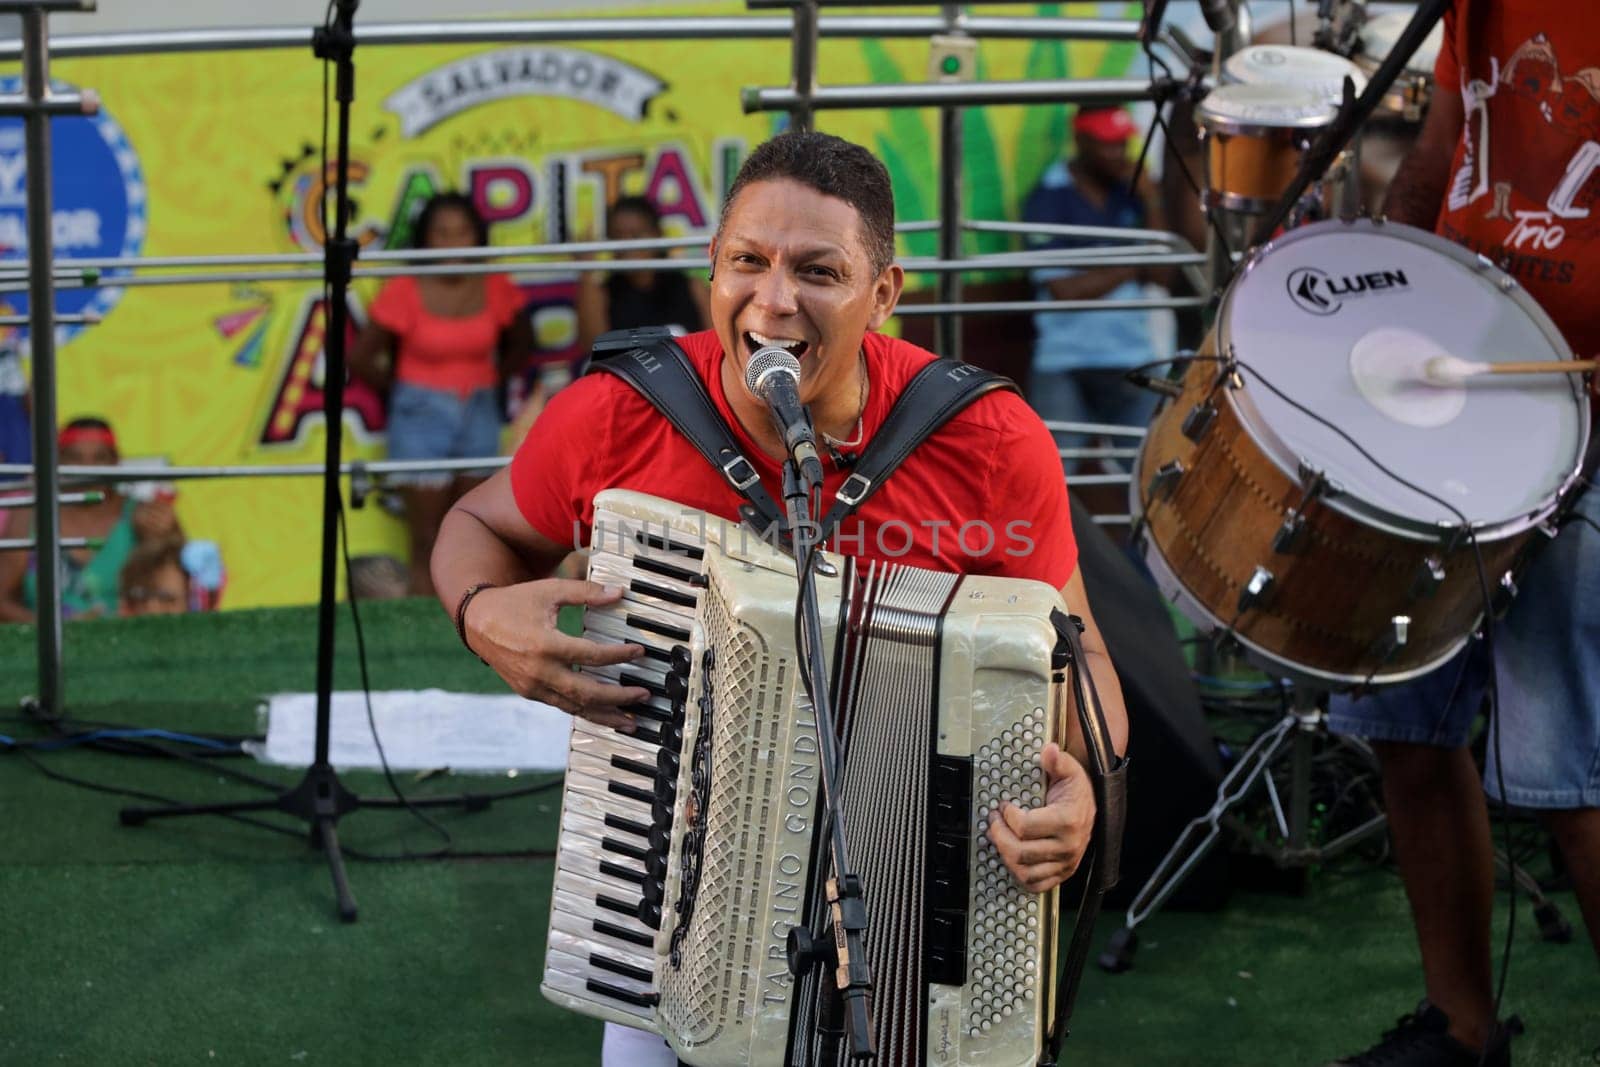 salvador, bahia, brazil - february 10, 2024: singer Targino Gondim, a Brazilian musician, is seen during a performance at the carnival in the city of Salvador.

